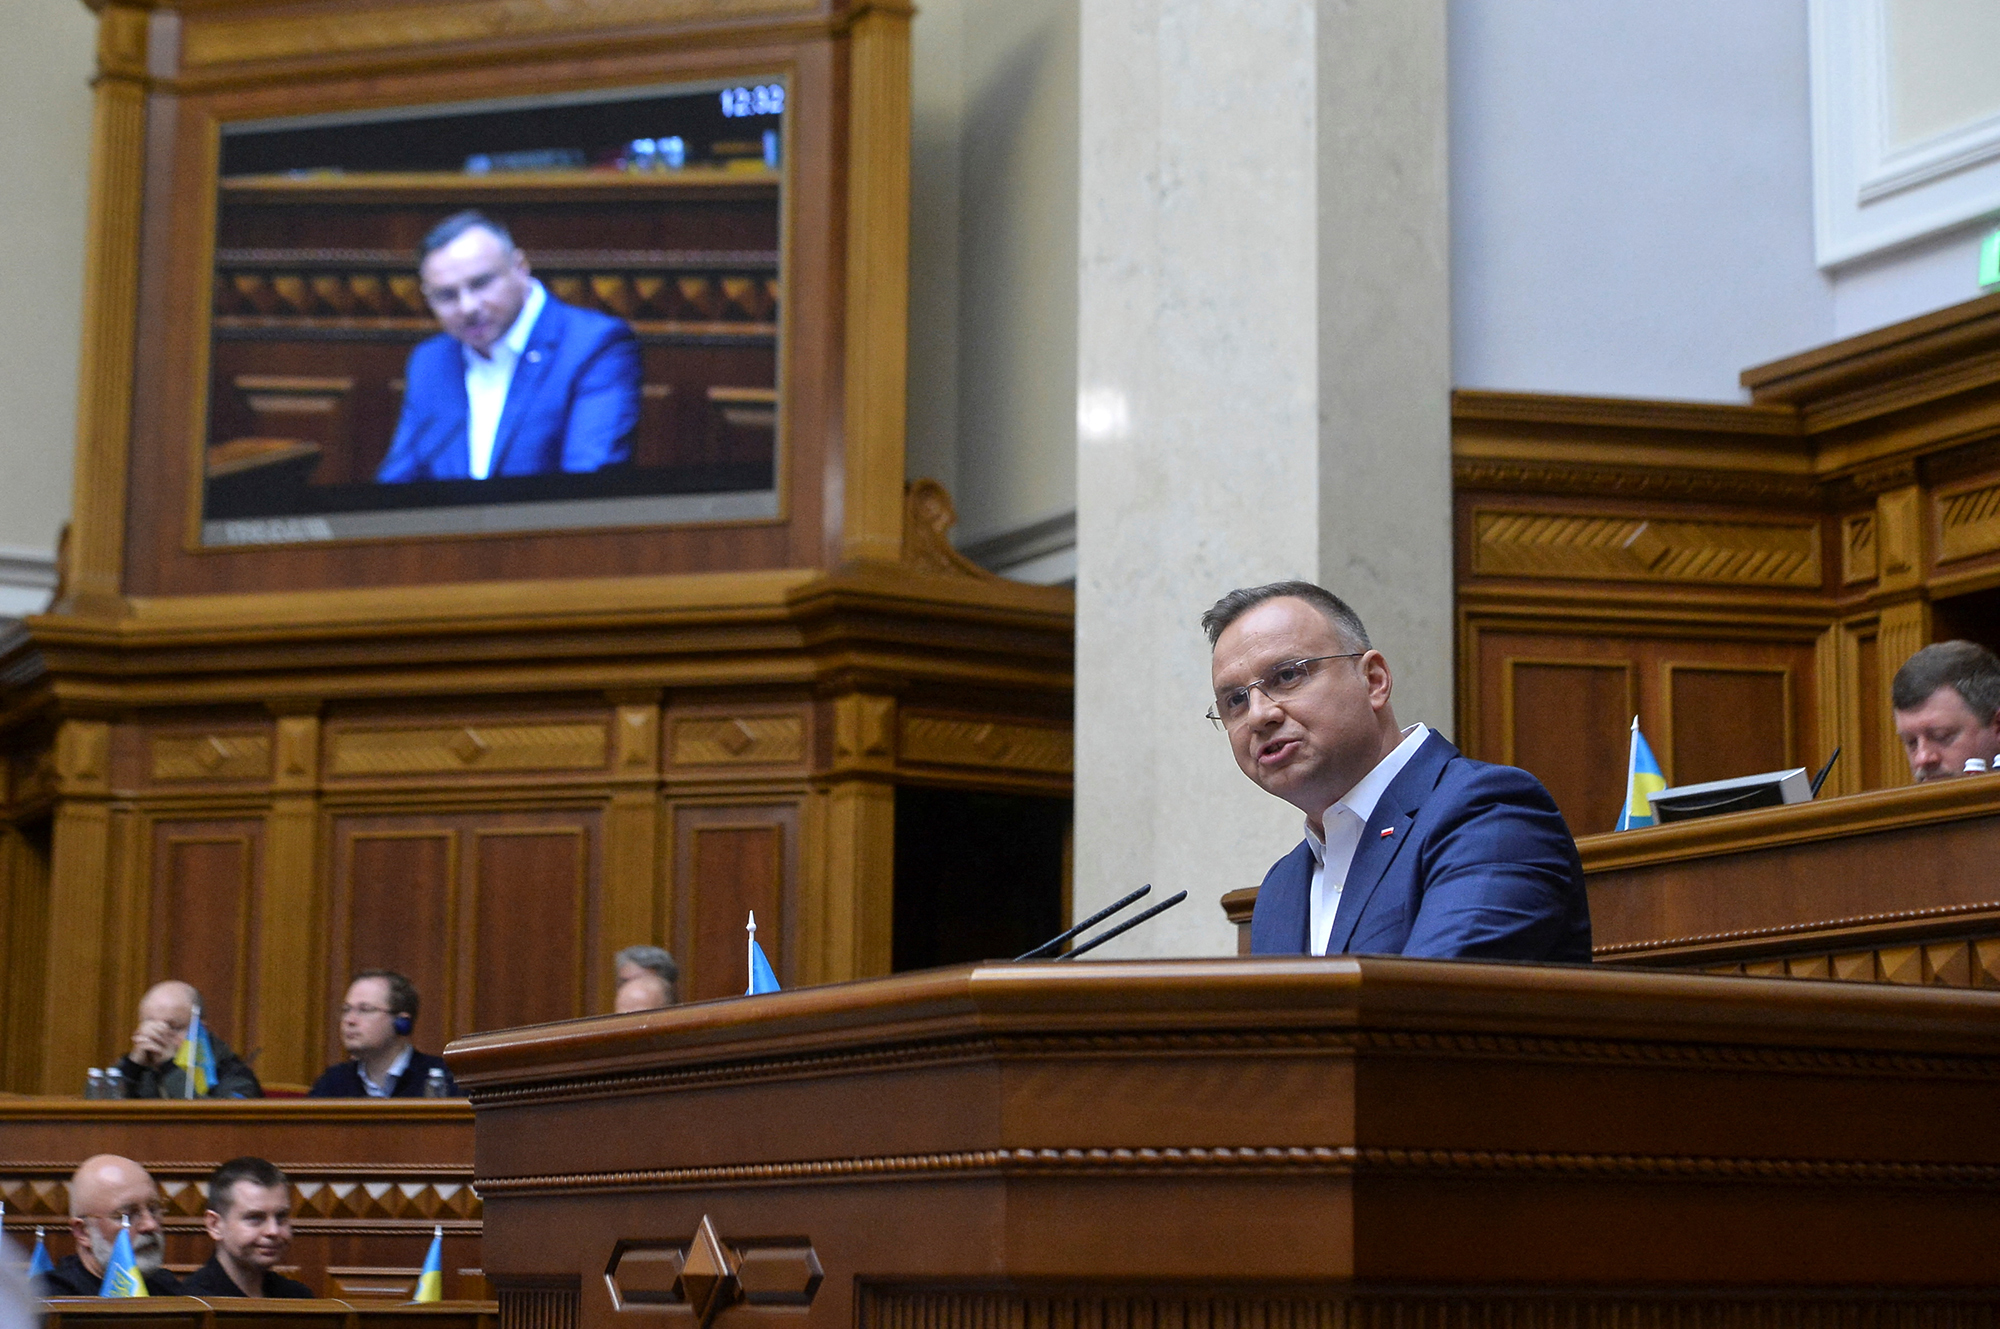 Polish President Andrzej Duda addresses lawmakers during a Ukrainian parliament session in Kyiv on May 22. (Stringer/Reuters)